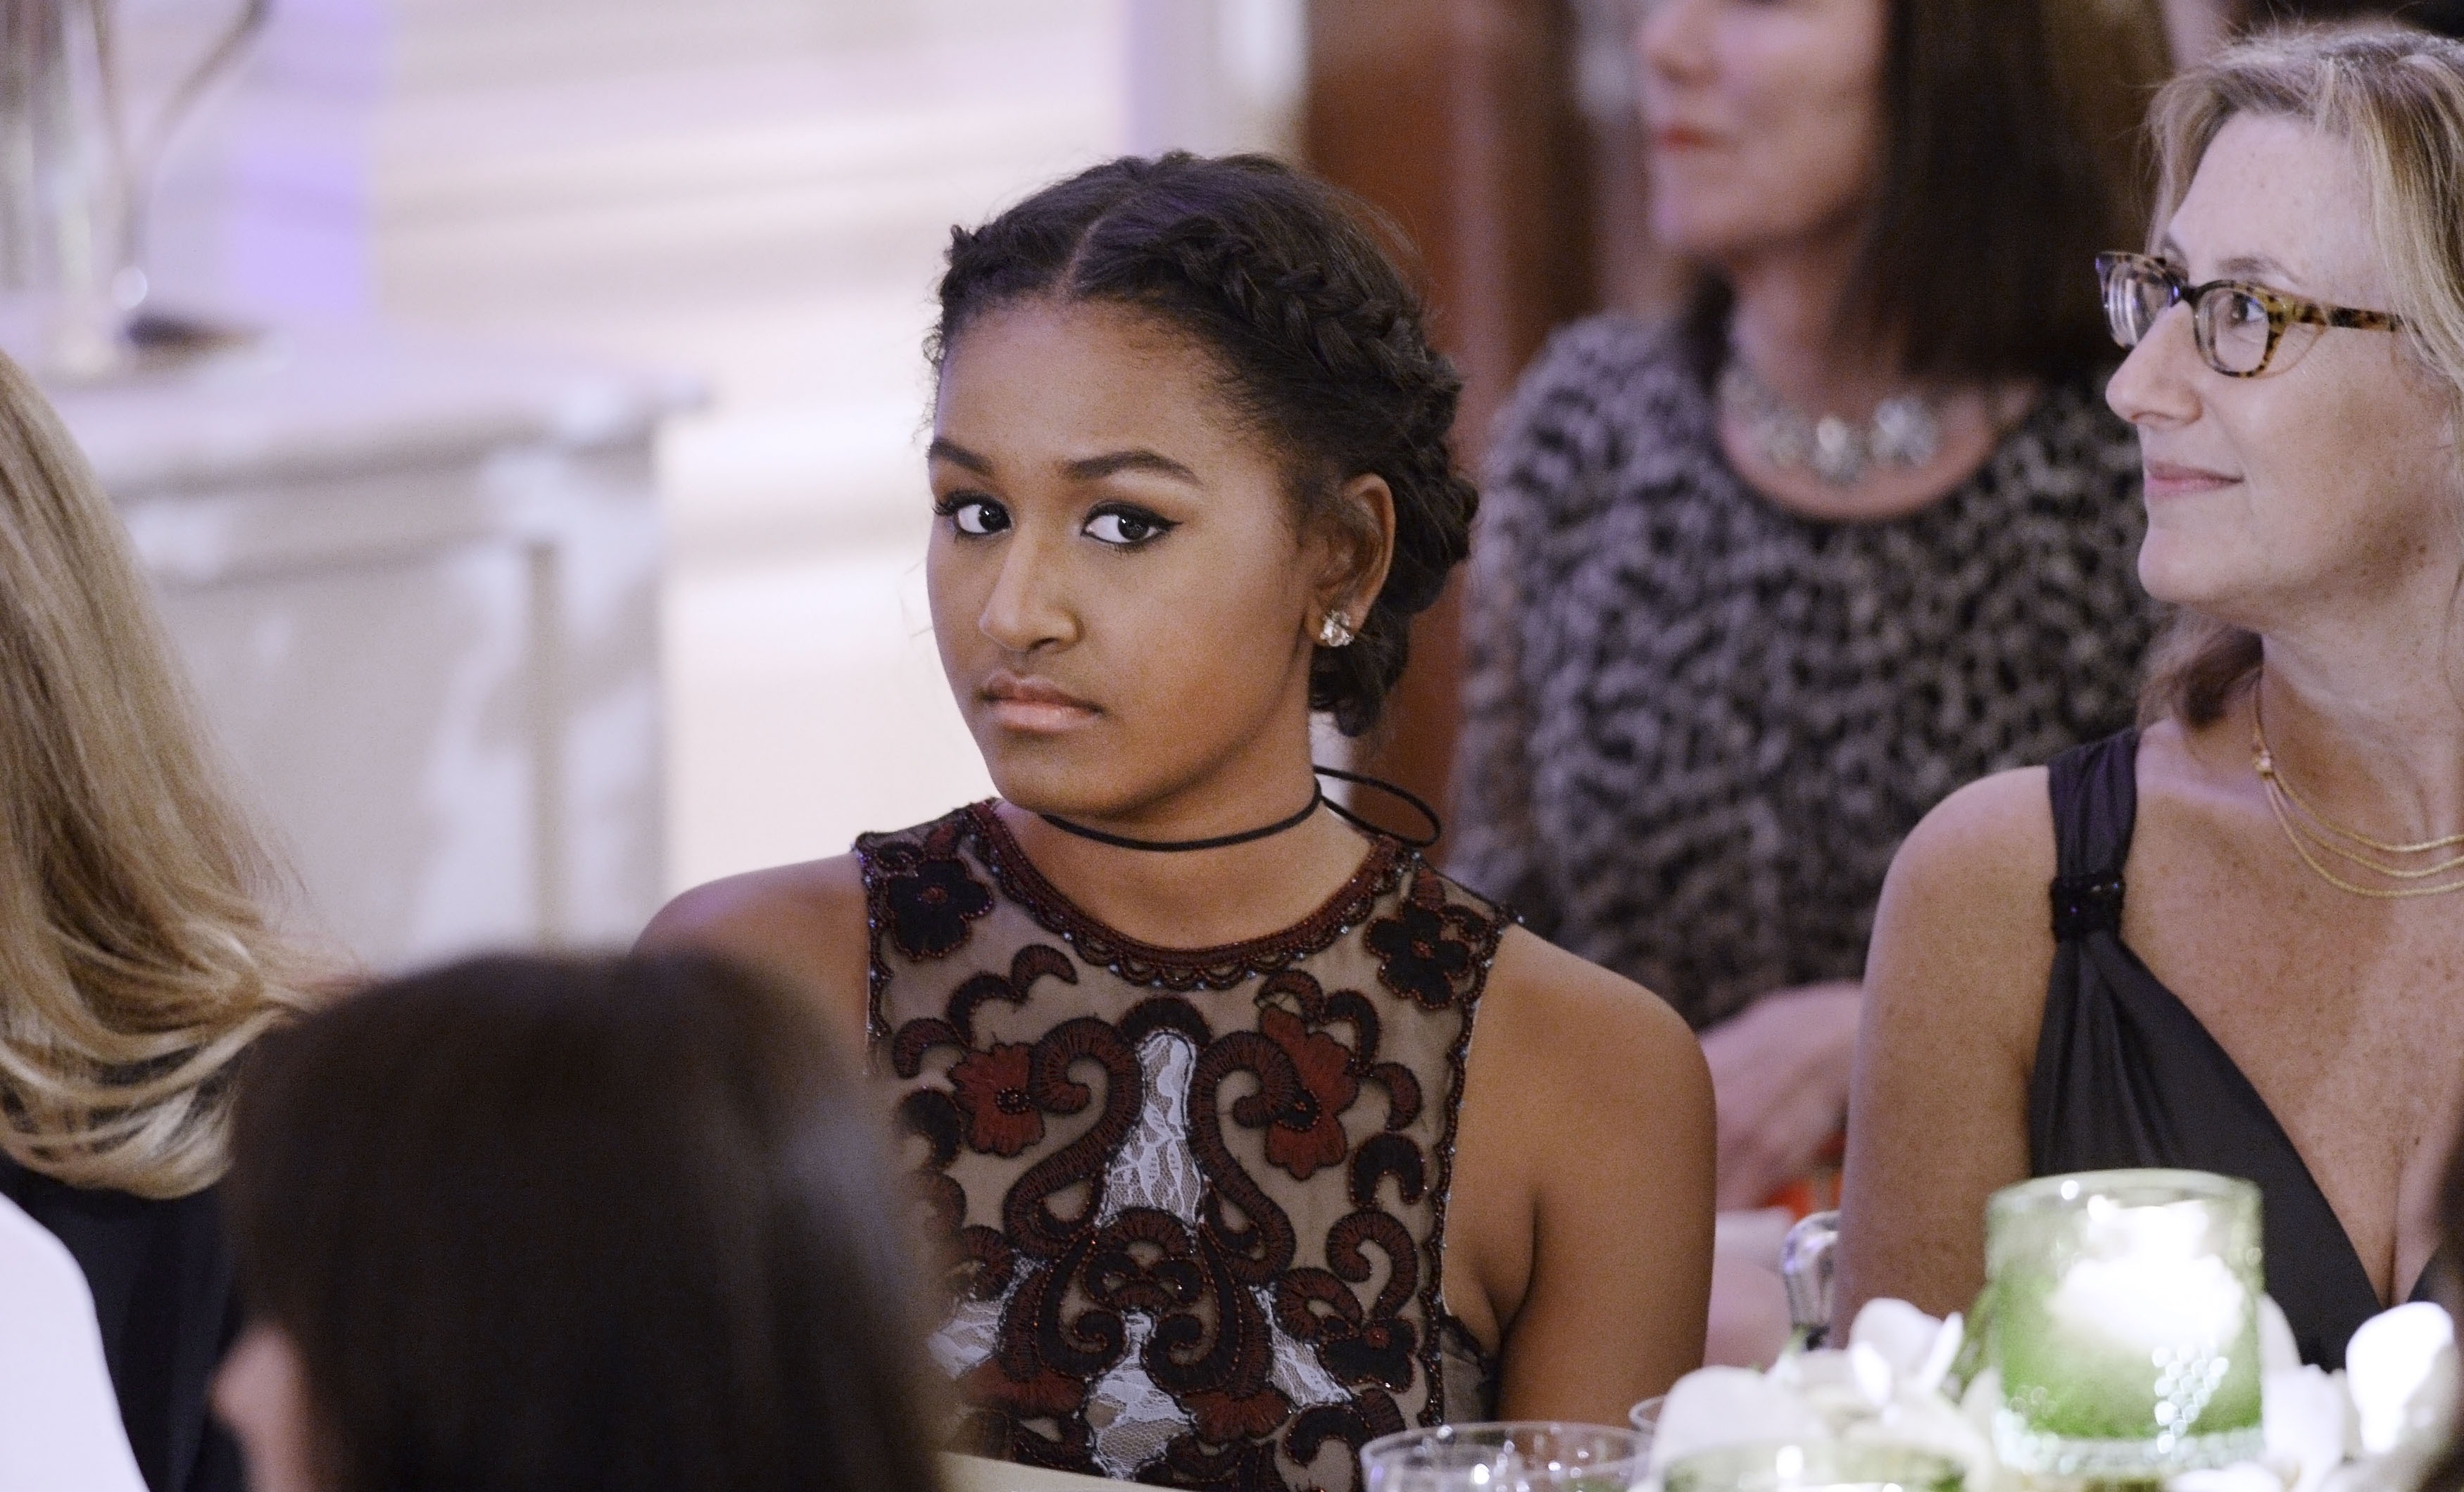 Sasha Obama attends the State Dinner at the White House March 10, 2016 in Washington, D.C.| Source: Getty Images